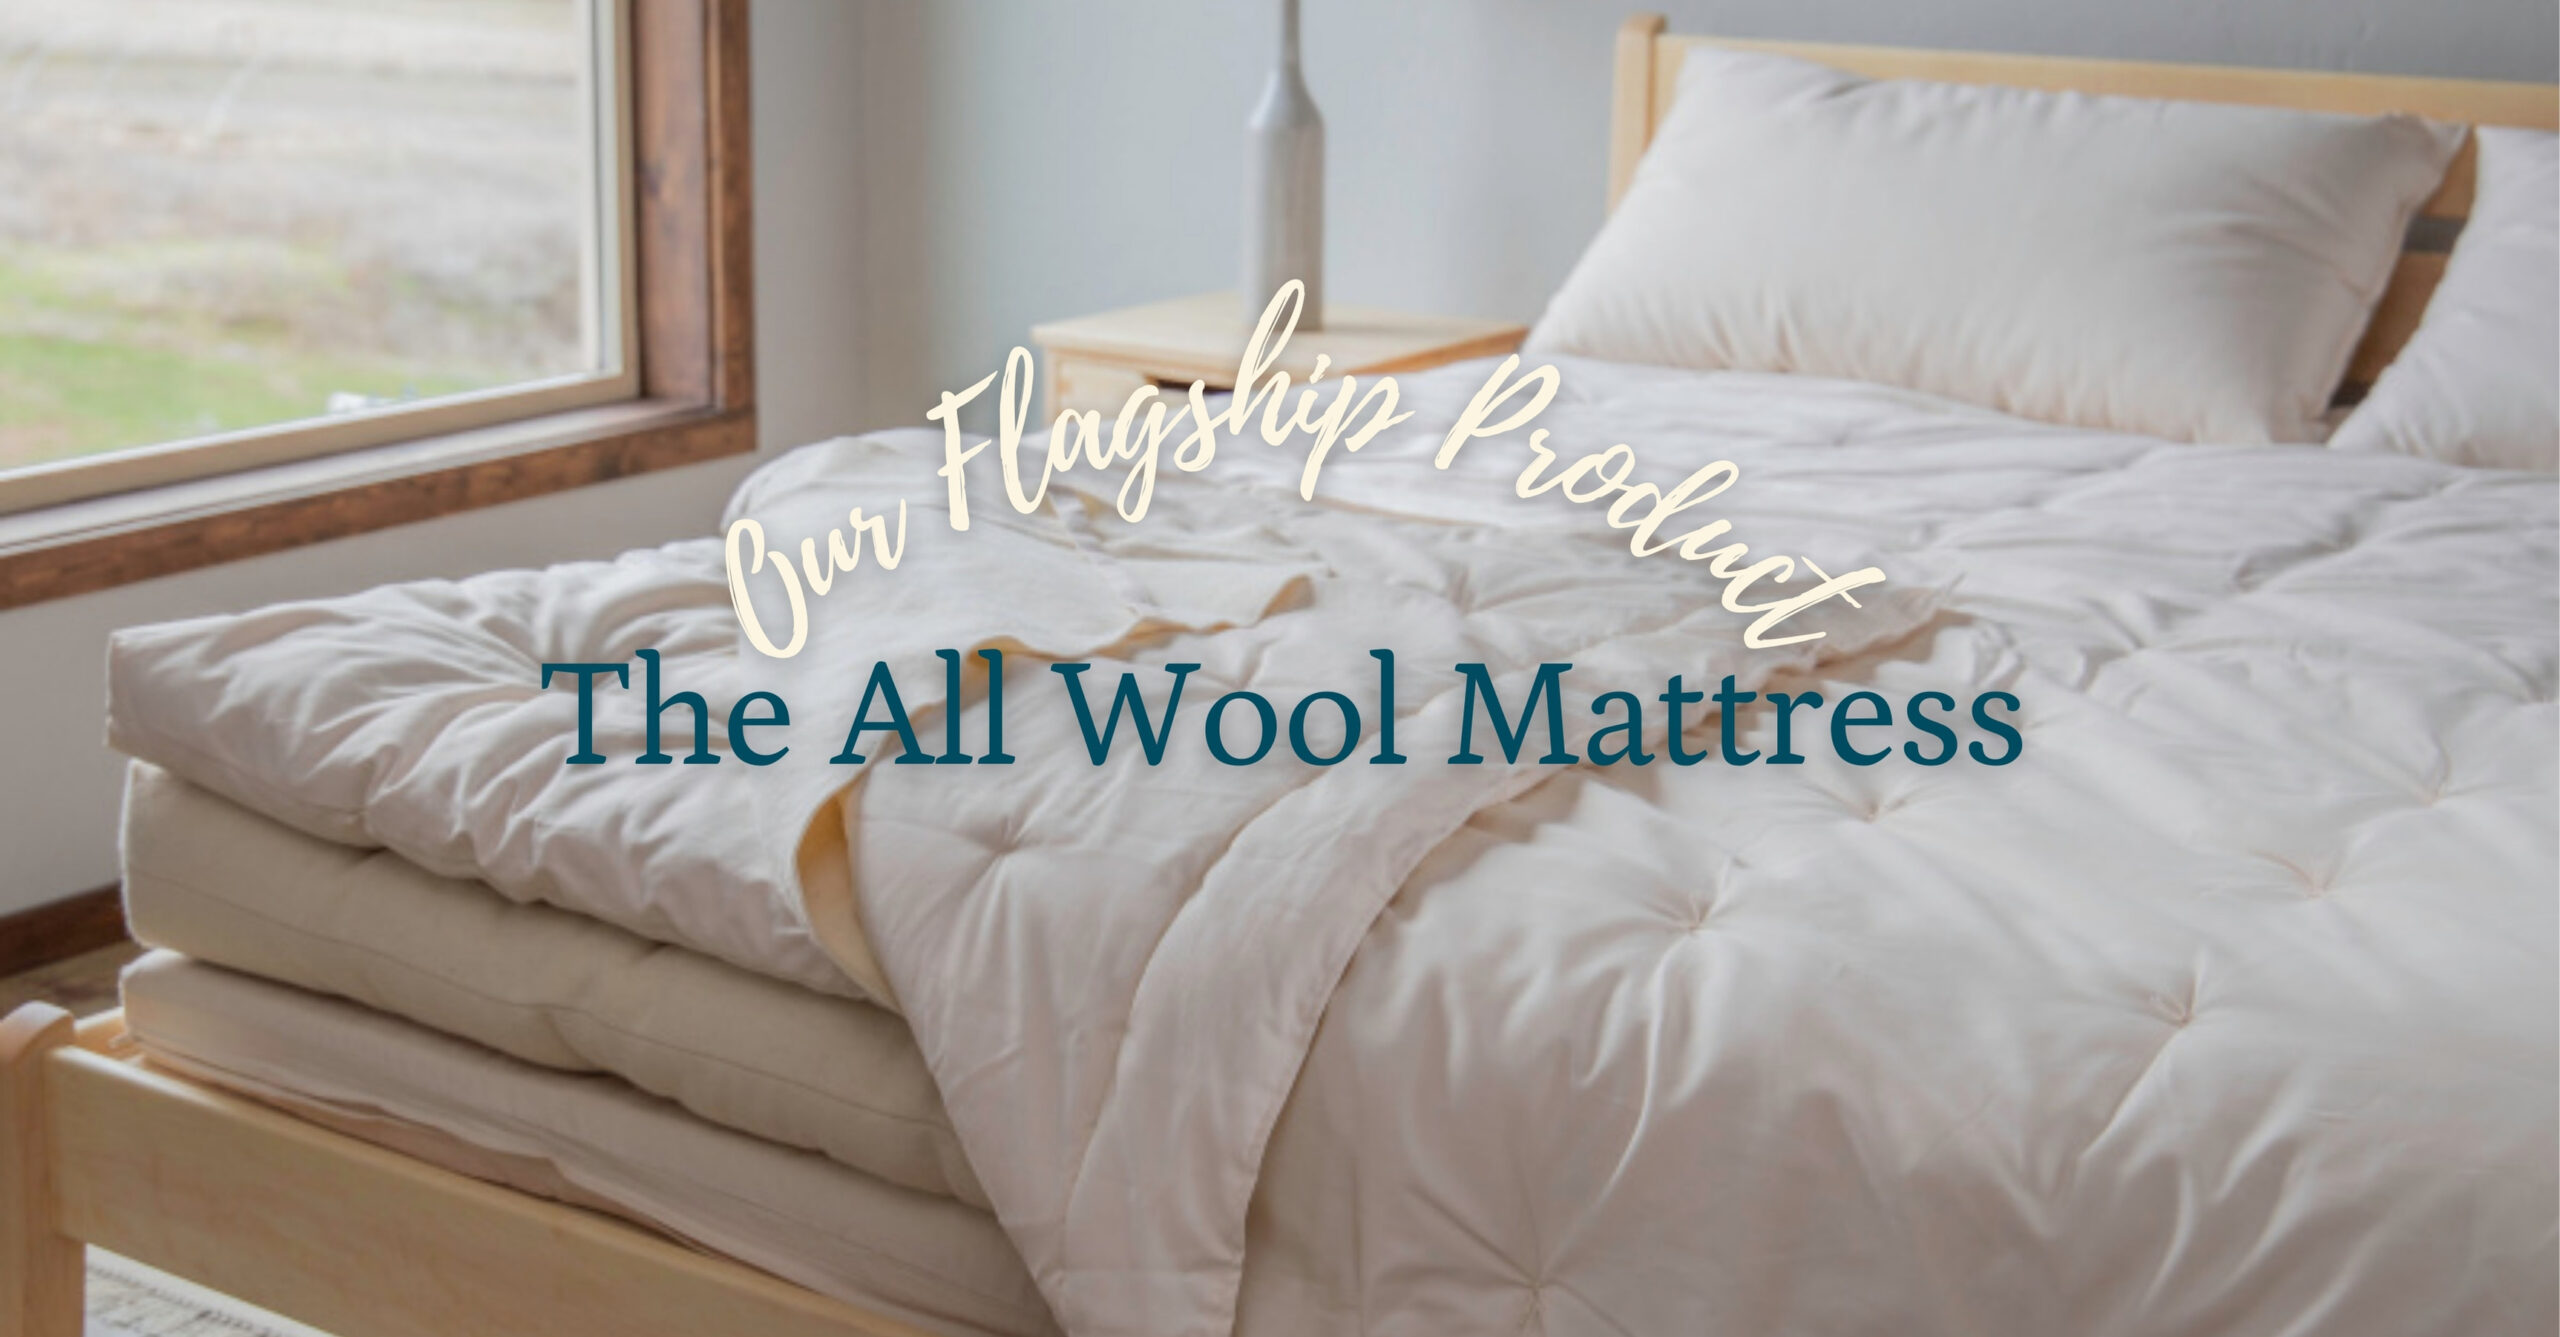 Our Flagship Product: The All Wool Mattress 2